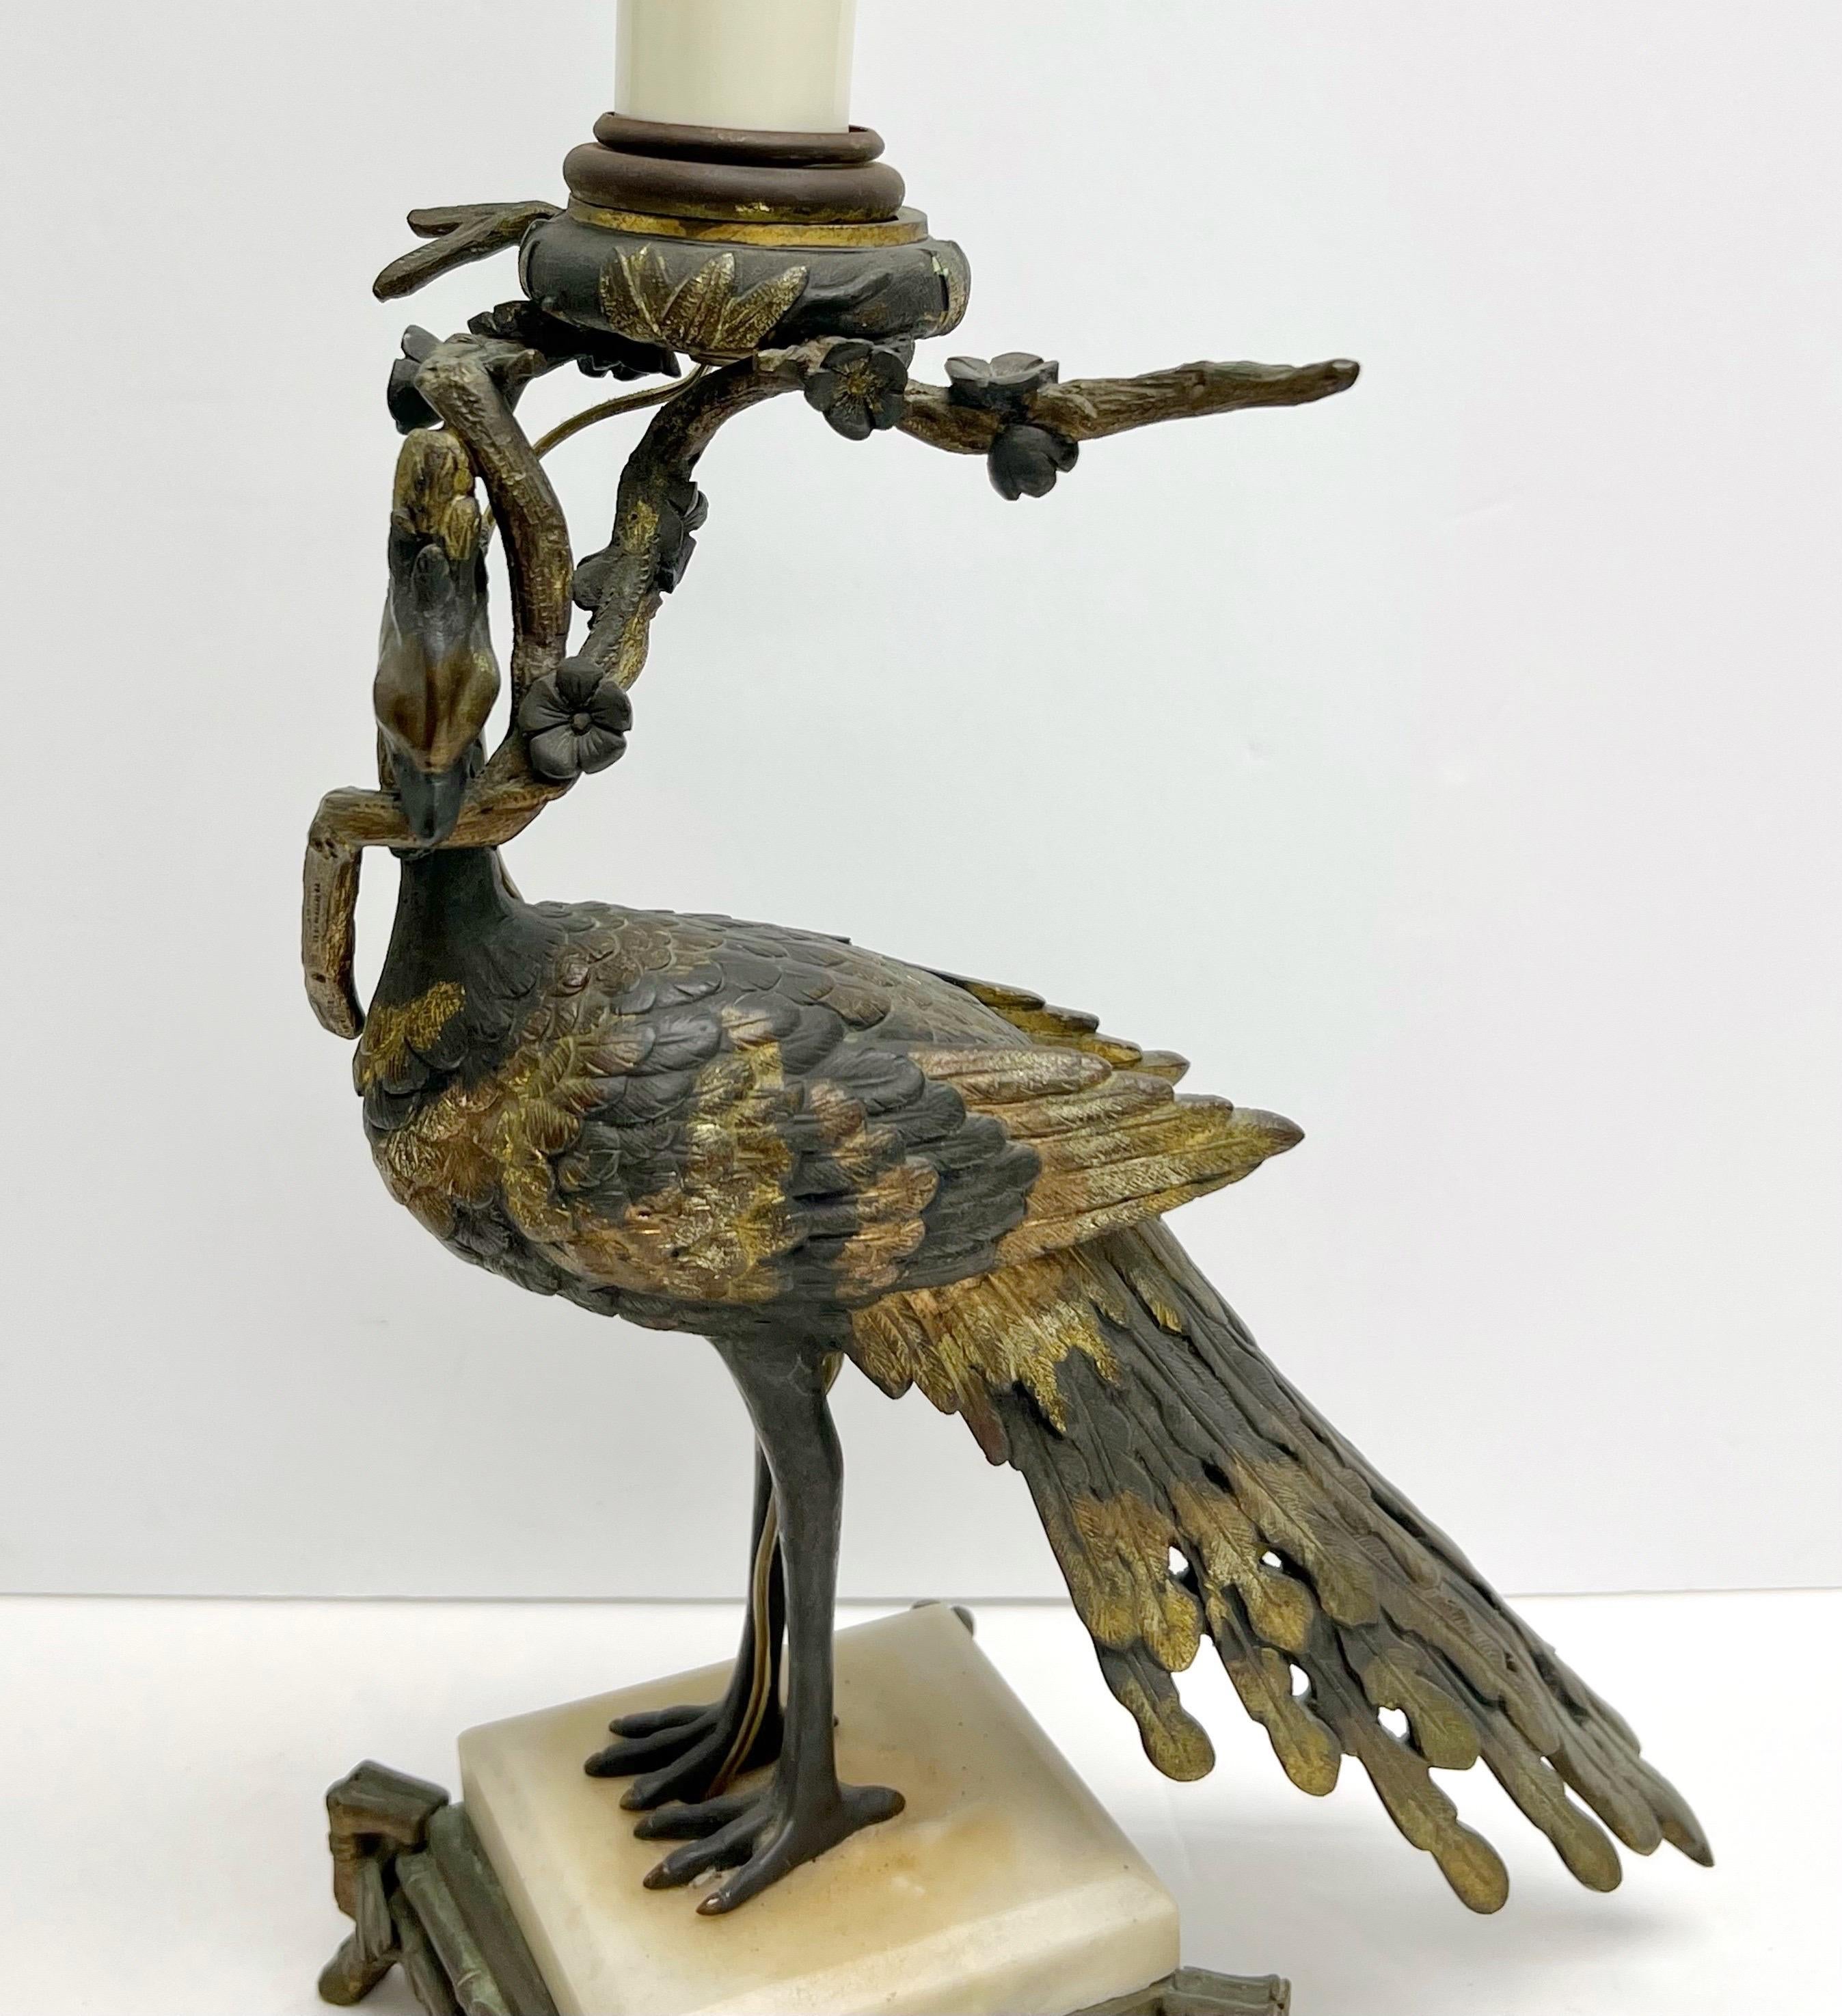 A highly ornamental table lamp with a peacock holding a branch. 